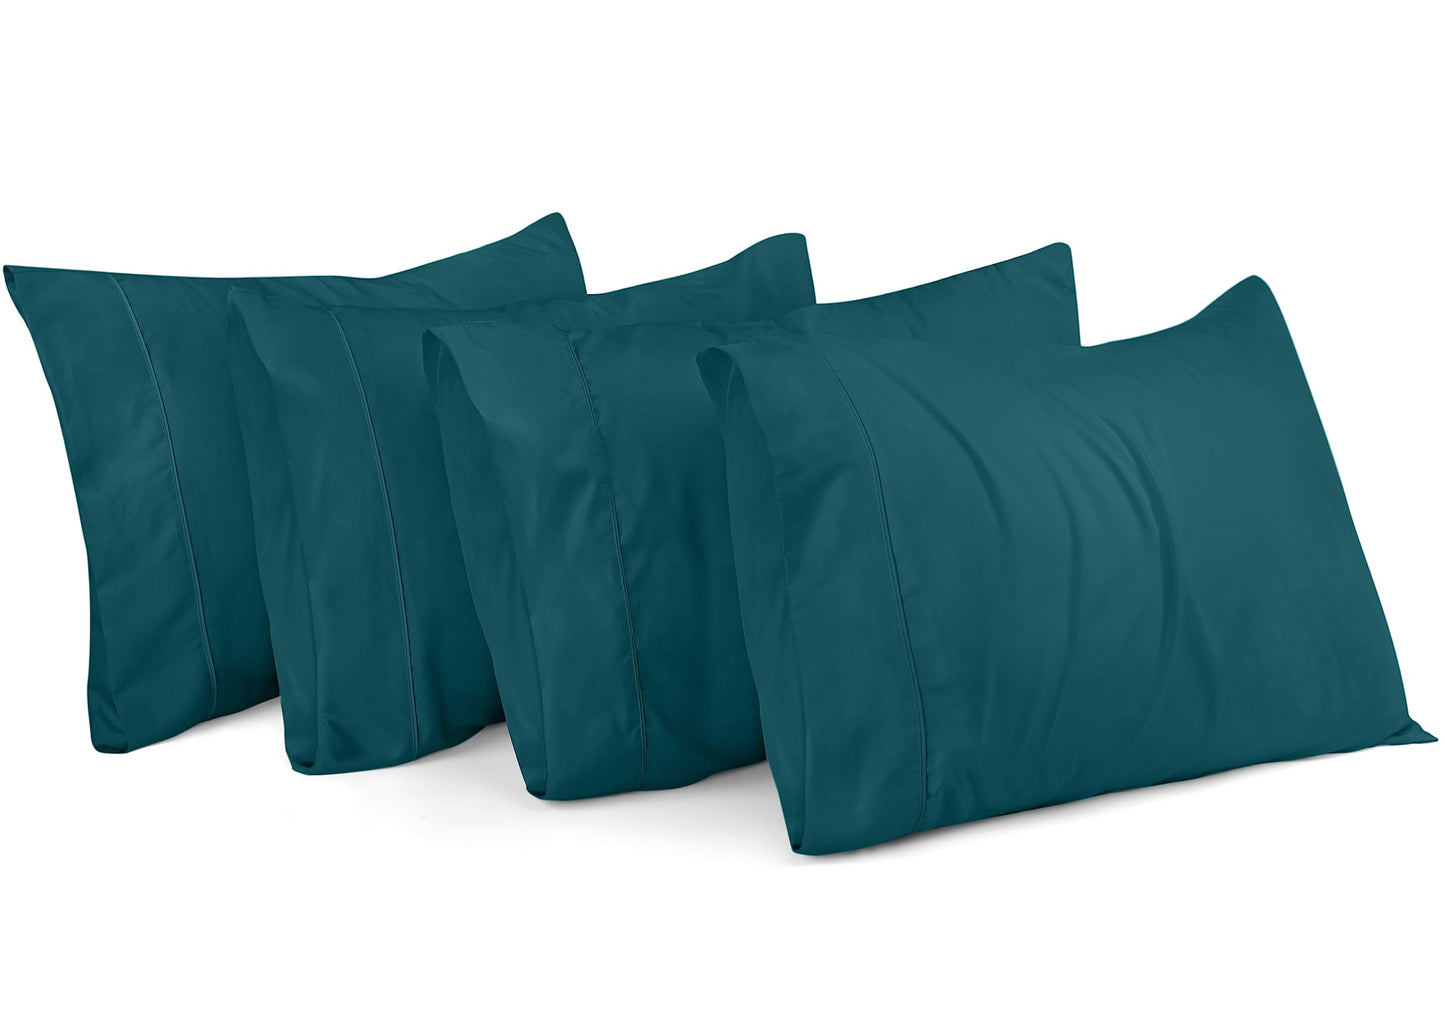 Utopia Bedding Queen Pillow Cases - 4 Pack - Envelope Closure - Soft Brushed Microfiber Fabric - Shrinkage and Fade Resistant Pillow Cases Queen Size 20 X 30 Inches (Queen, Teal)